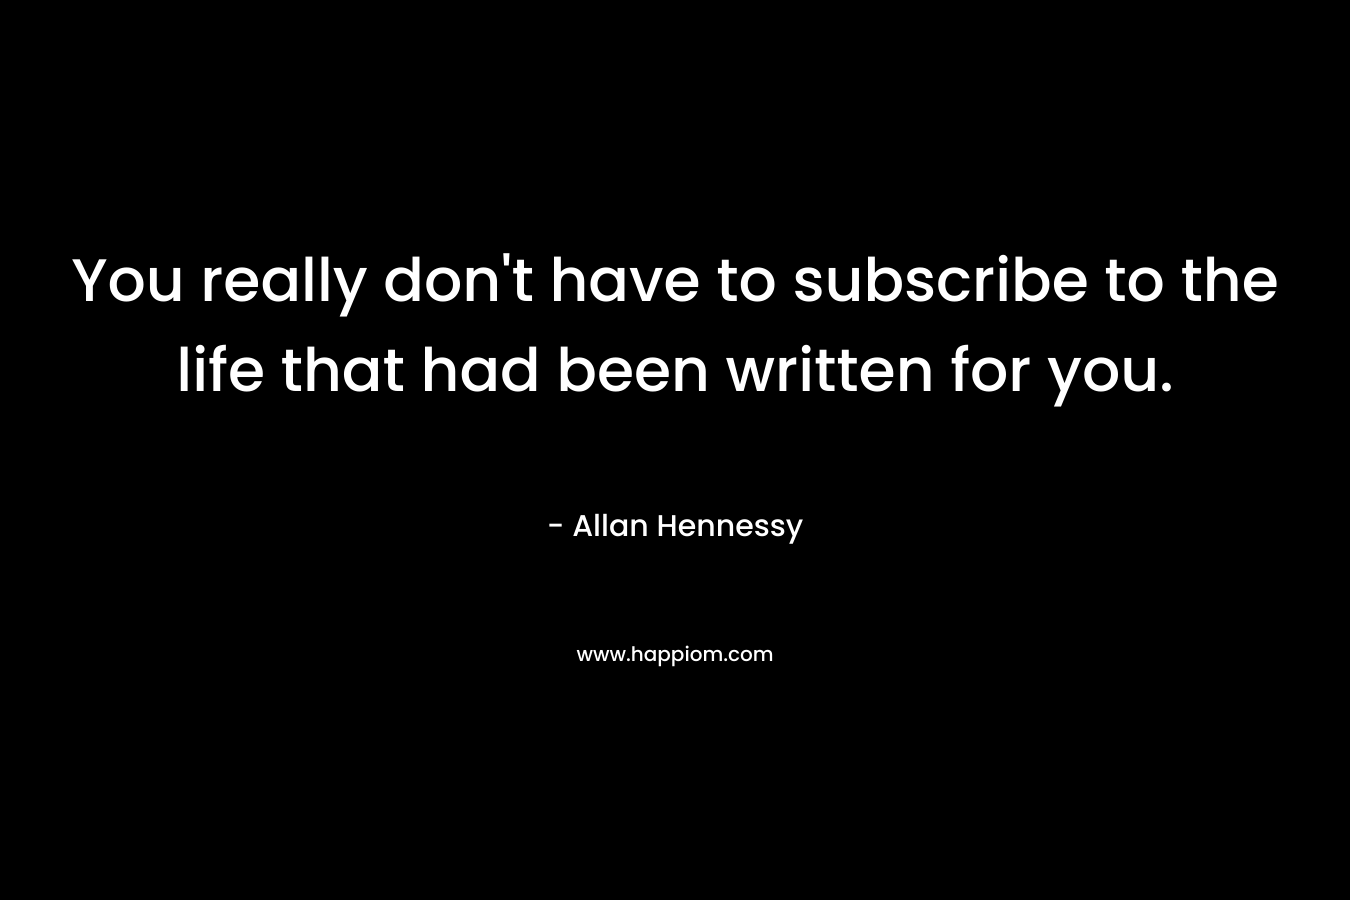 You really don’t have to subscribe to the life that had been written for you. – Allan Hennessy